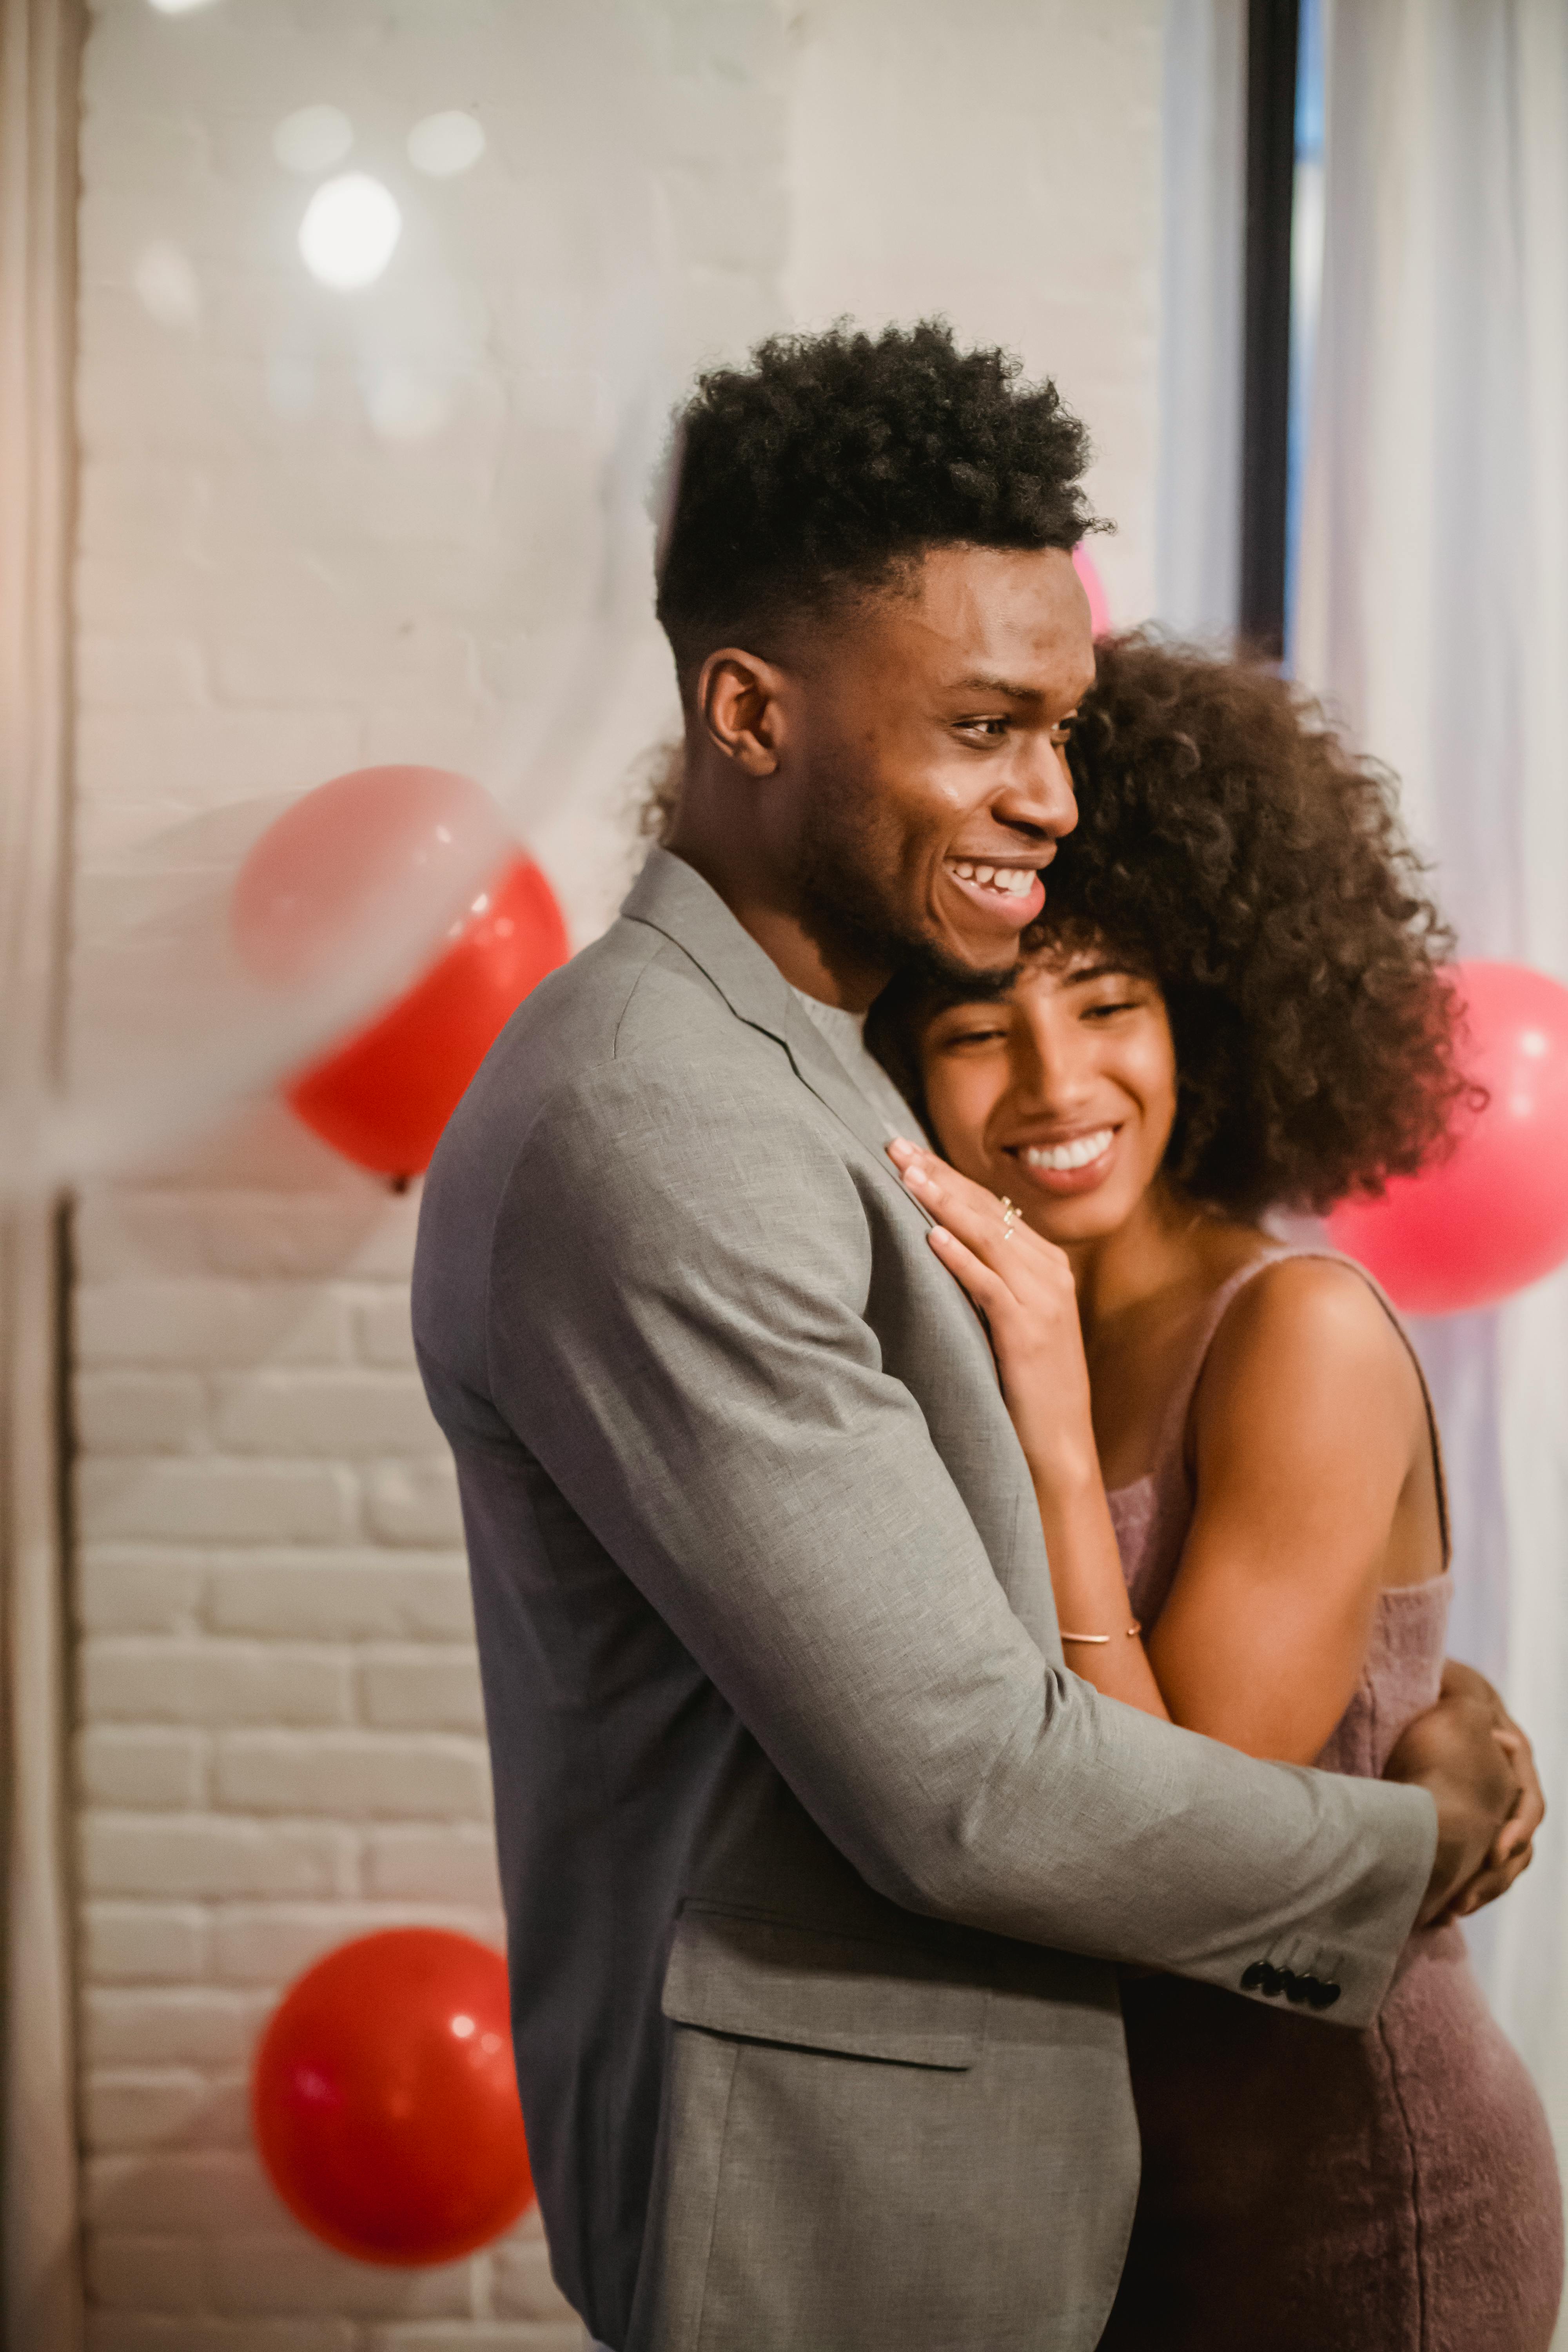 smiling black couple dancing while embracing in loft with balloons